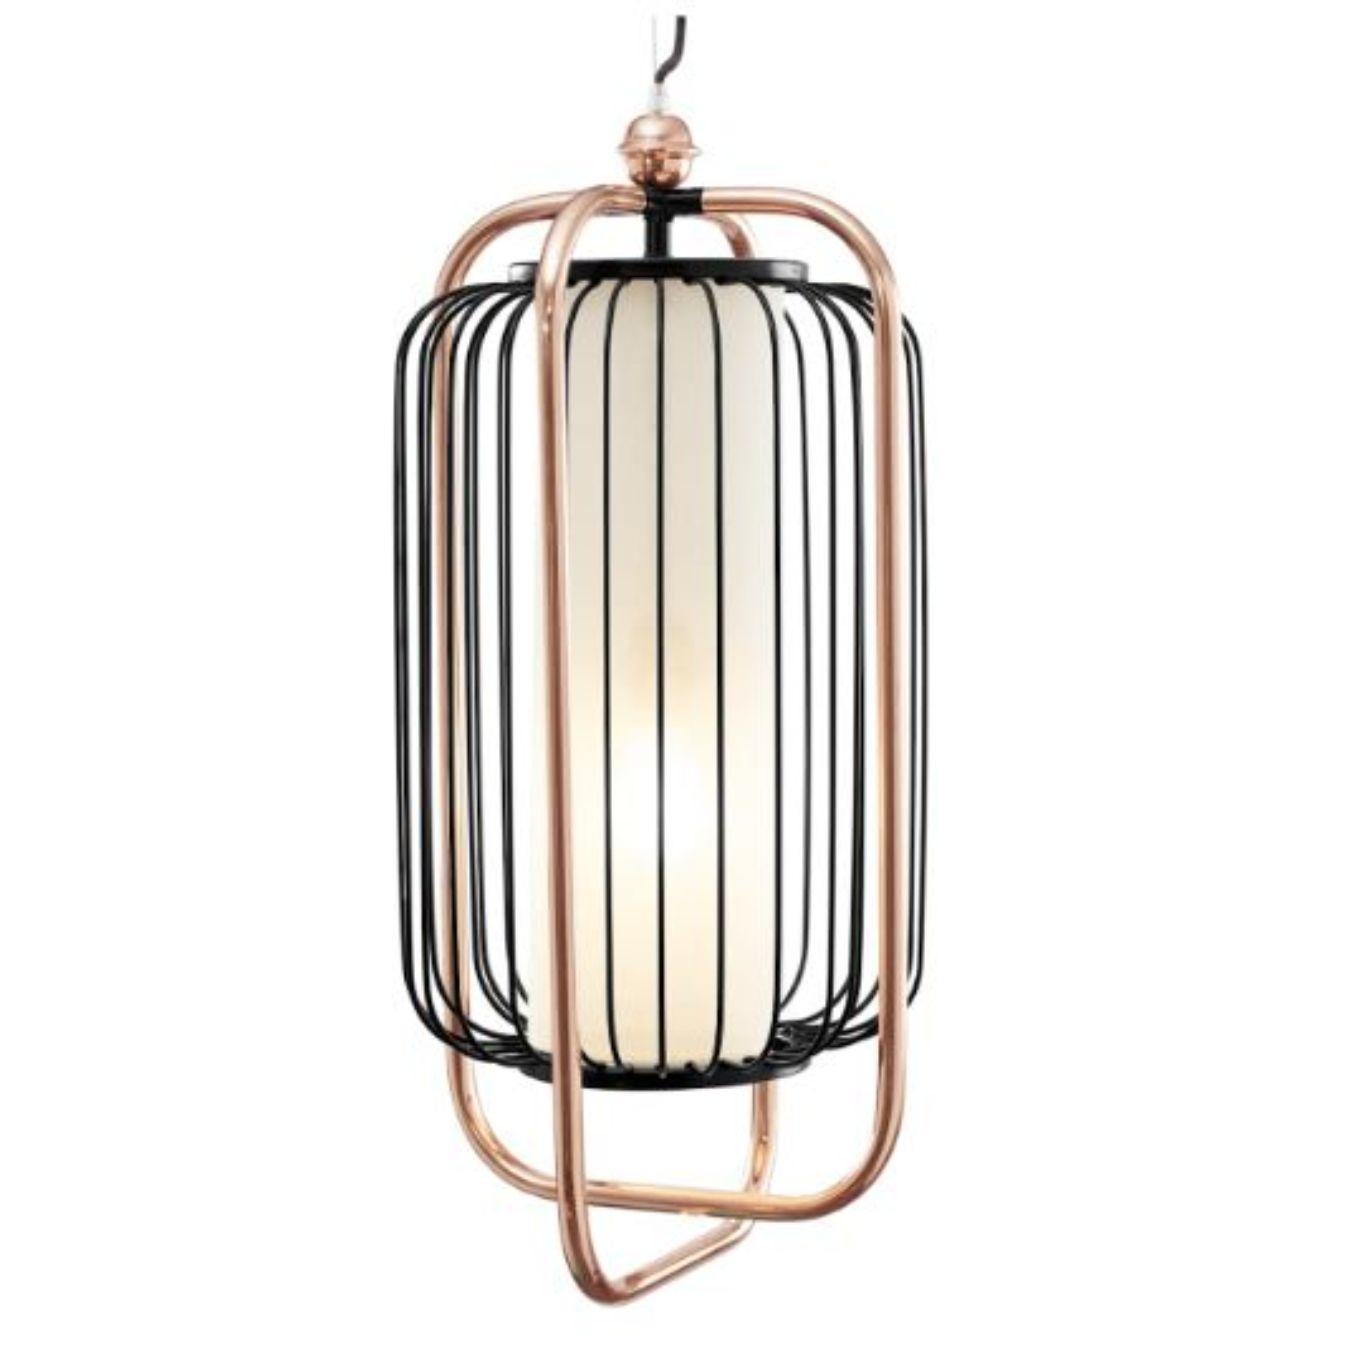 Portuguese Brass and Copper Jules II Suspension Lamp by Dooq For Sale